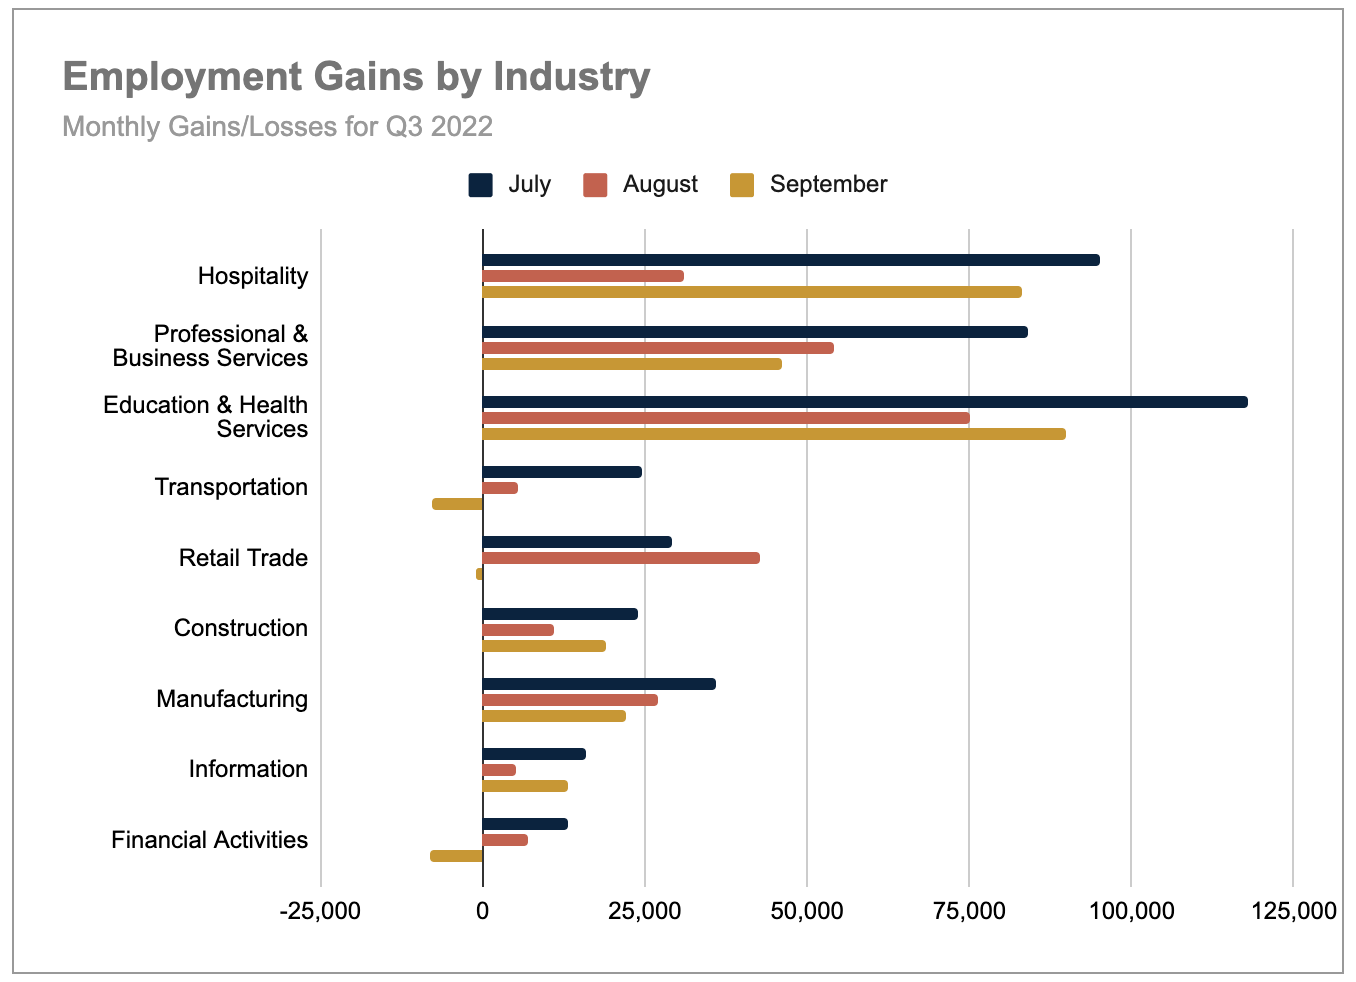 Employment gains by industry, monthly gains/losses for Q3 2022